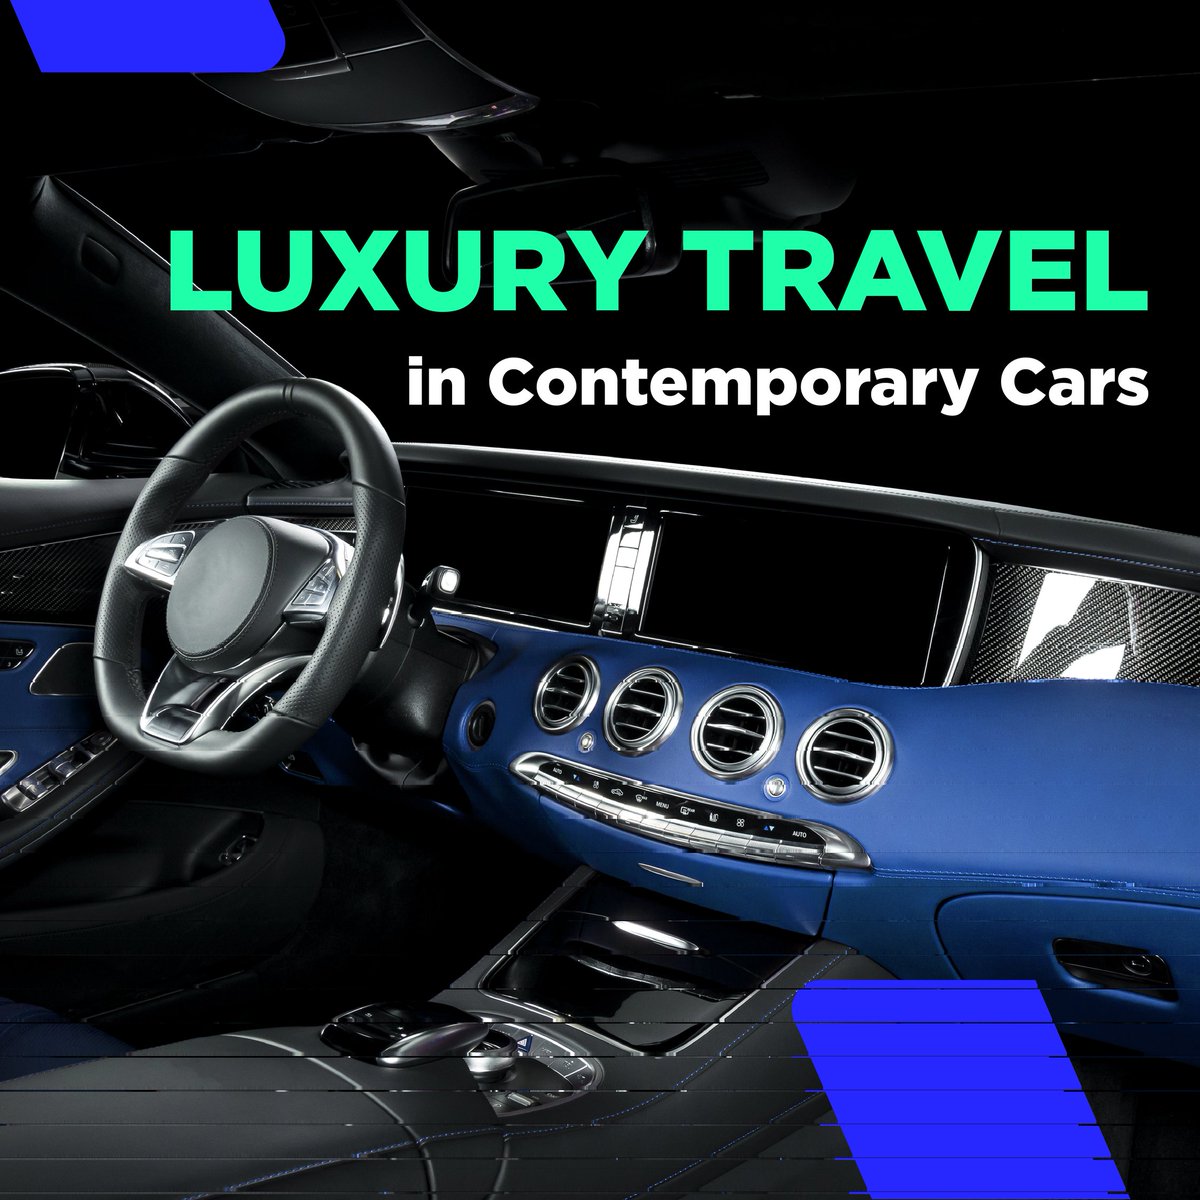 Embark on a journey of luxury with top-tier automobiles! From lavish interiors to cutting-edge technology, every ride is an unforgettable experience. Share with us your favorite features in luxury cars!
#LuxuryCars #RideInStyle #AutoMarket